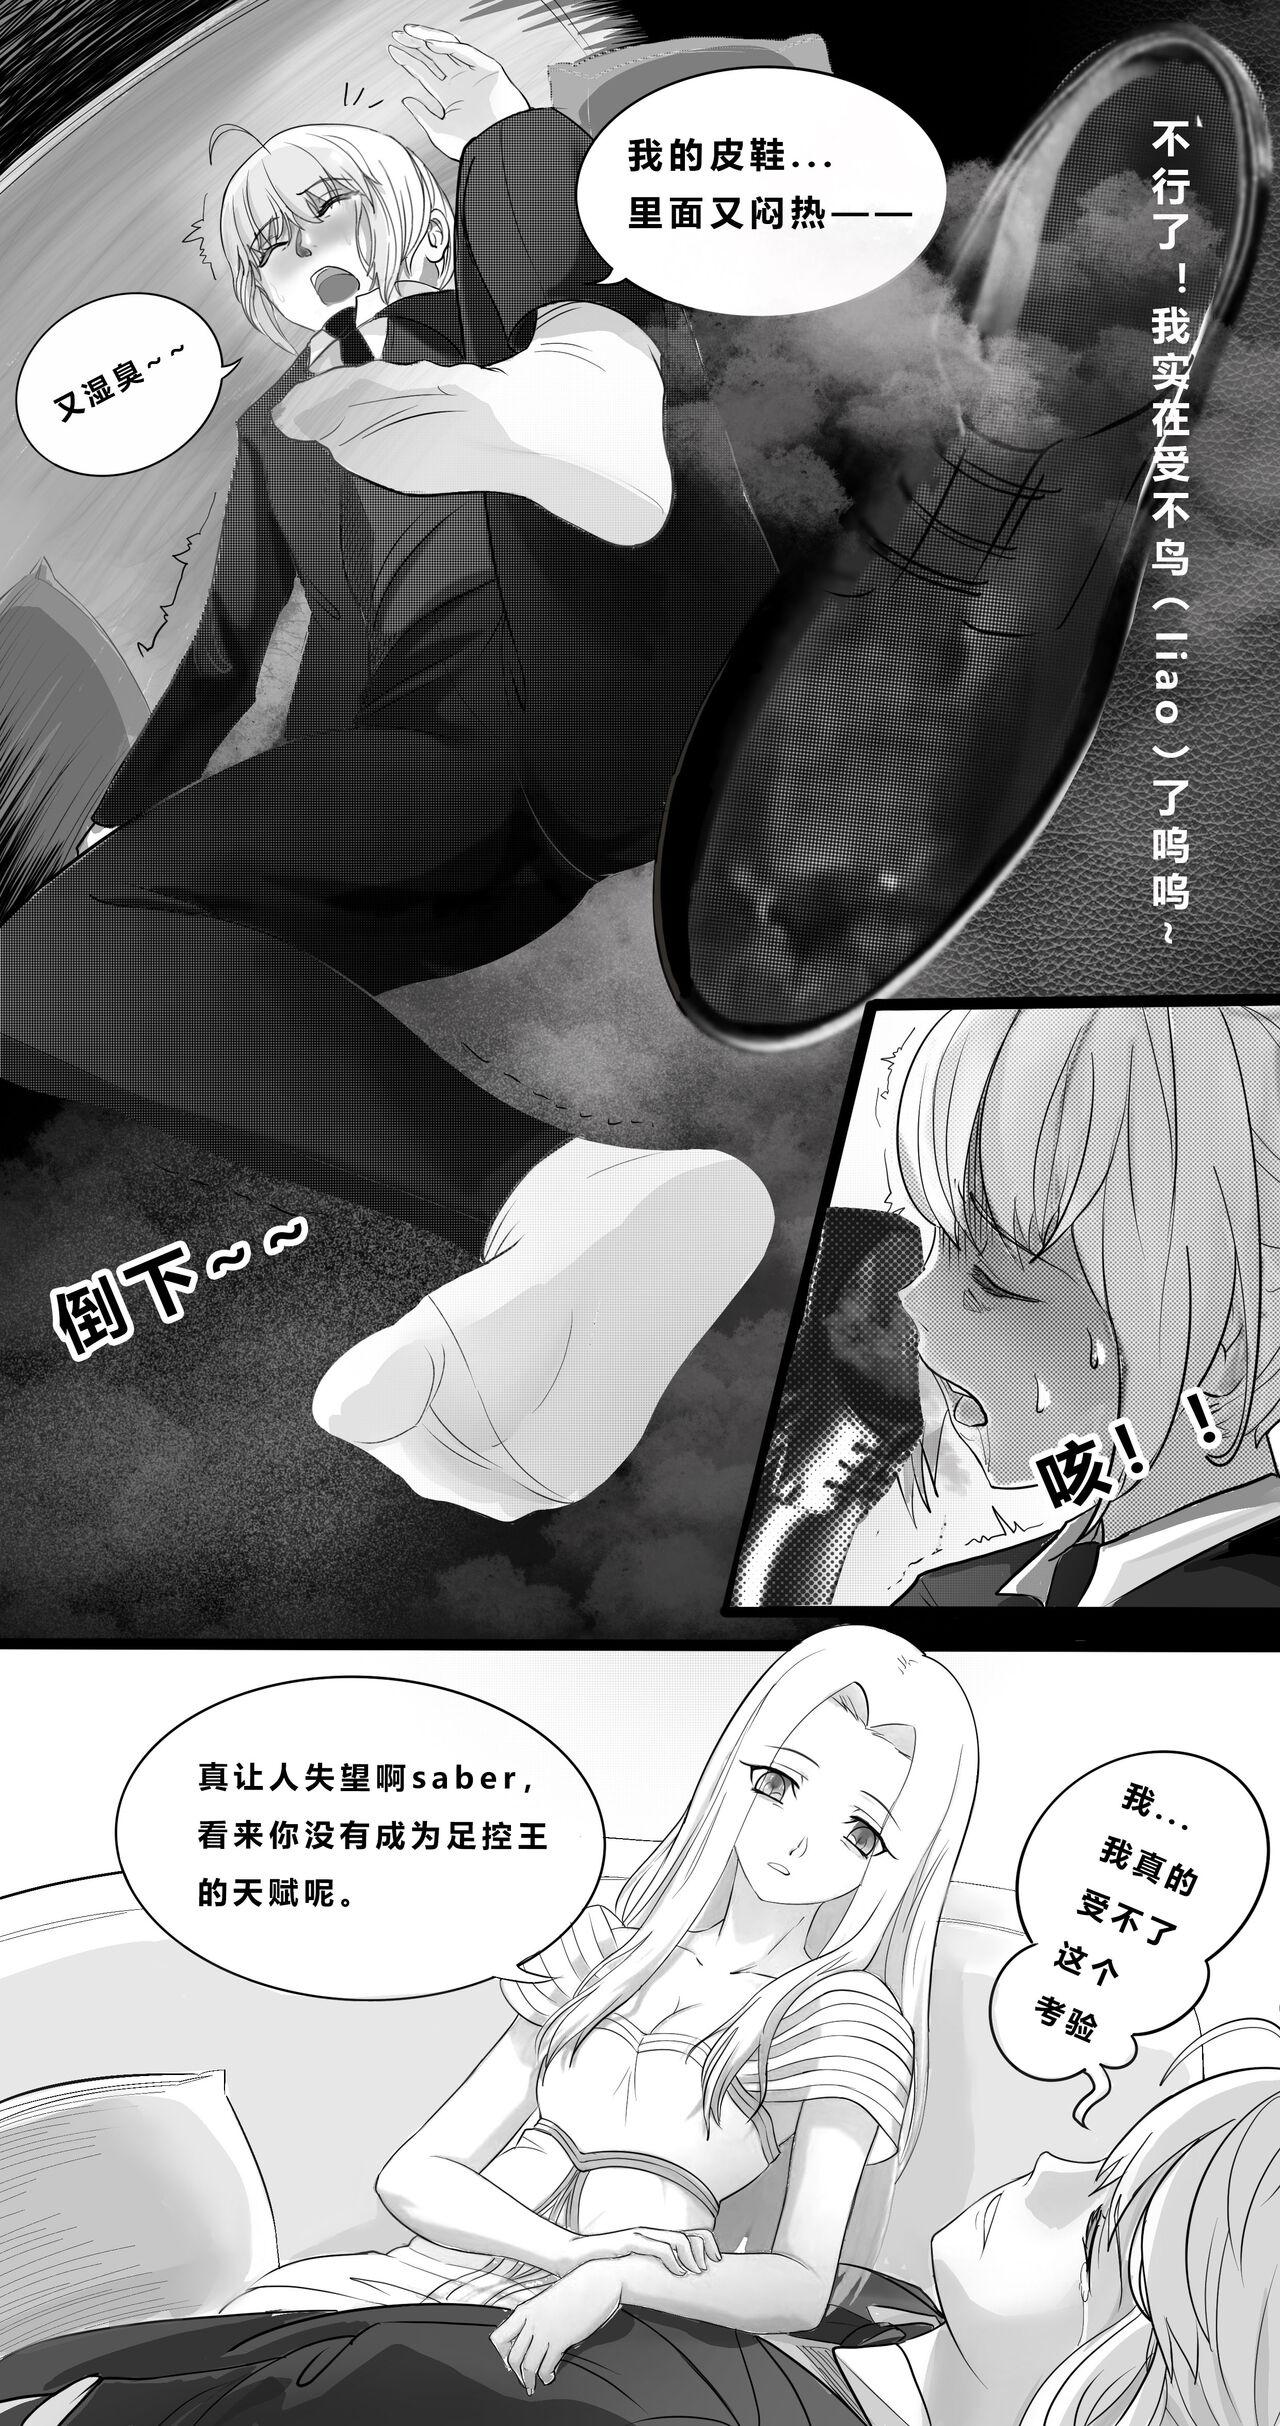 Teenfuns FATE REQUEST CHINESE VERSION - Fate stay night Transsexual - Page 2